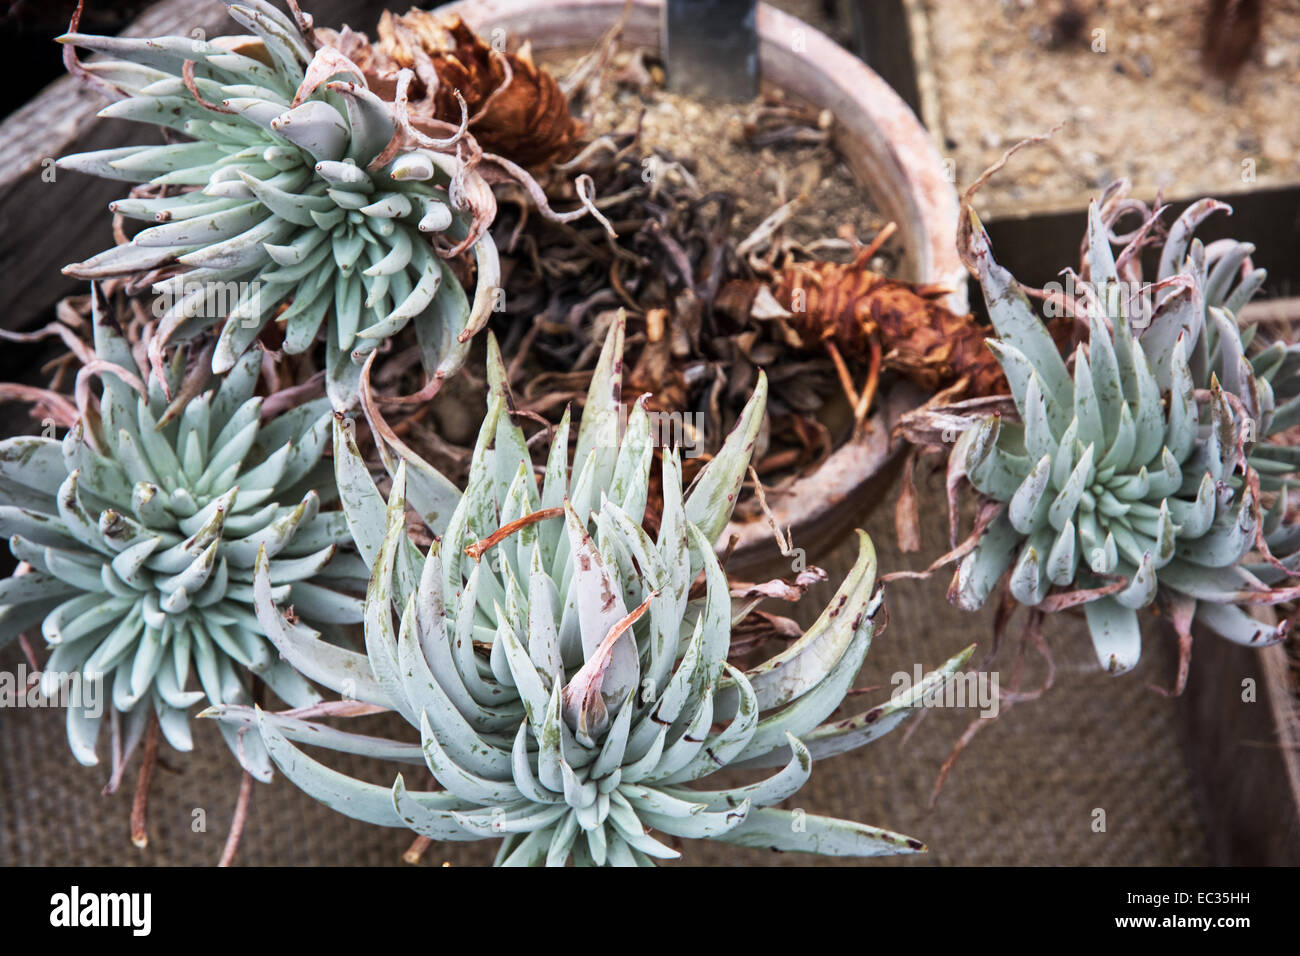 Dudleya is a genus of succulent perennials. Natural theme. Stock Photo